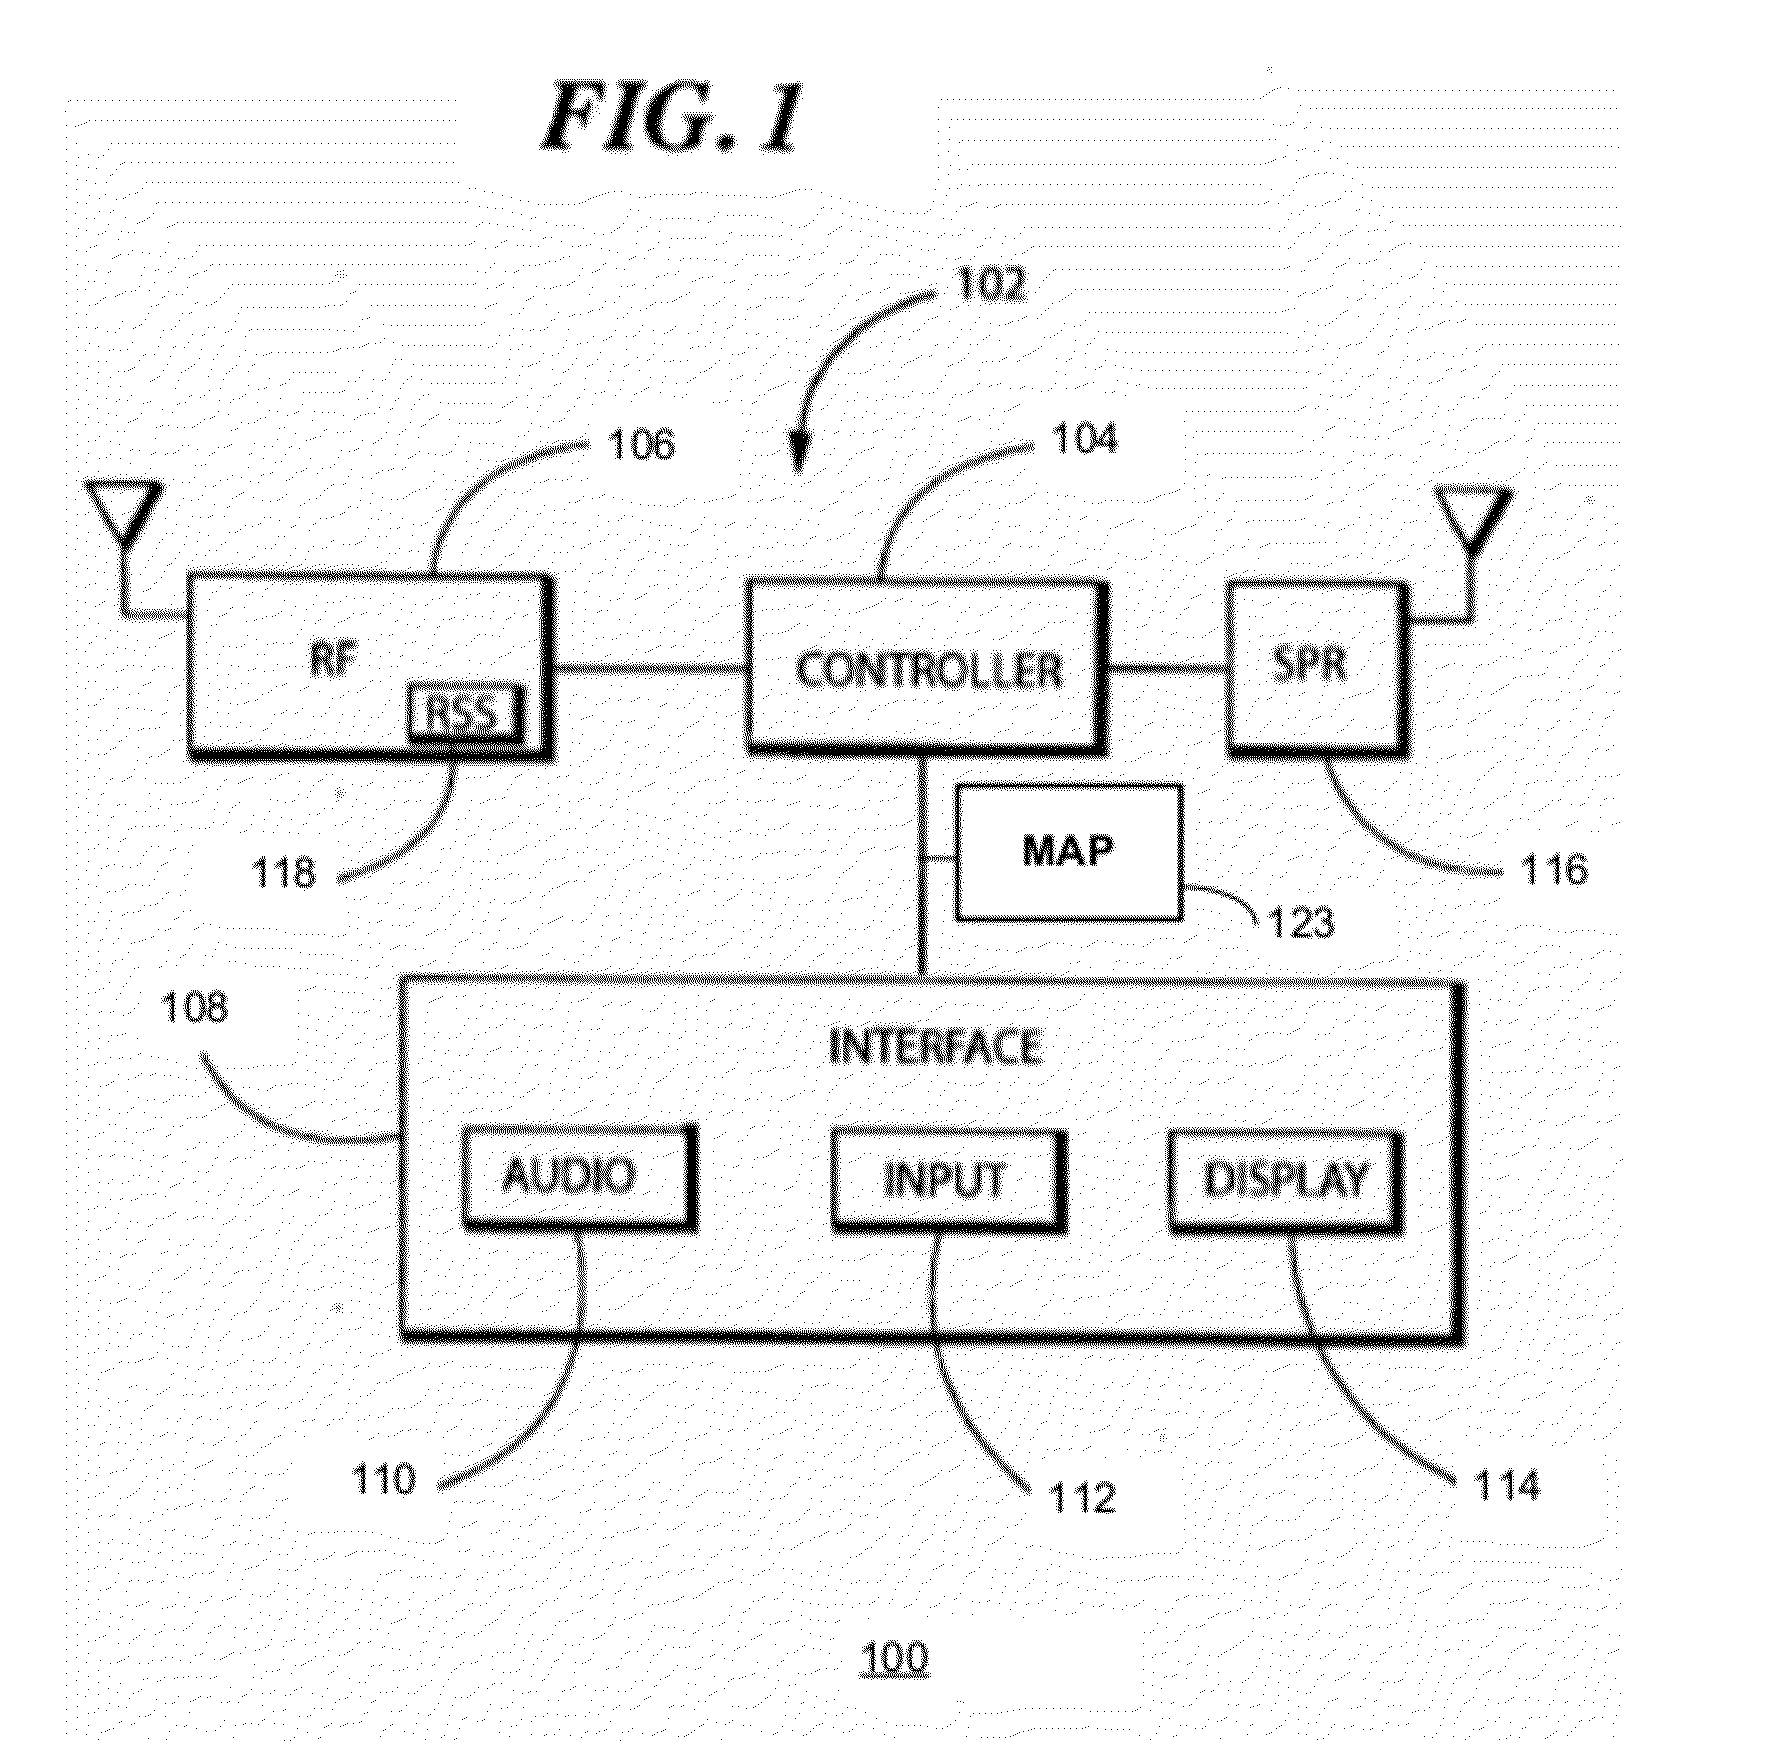 Systems and methods for selectively invoking positioning systems for mobile device control applications using wireless network measurements